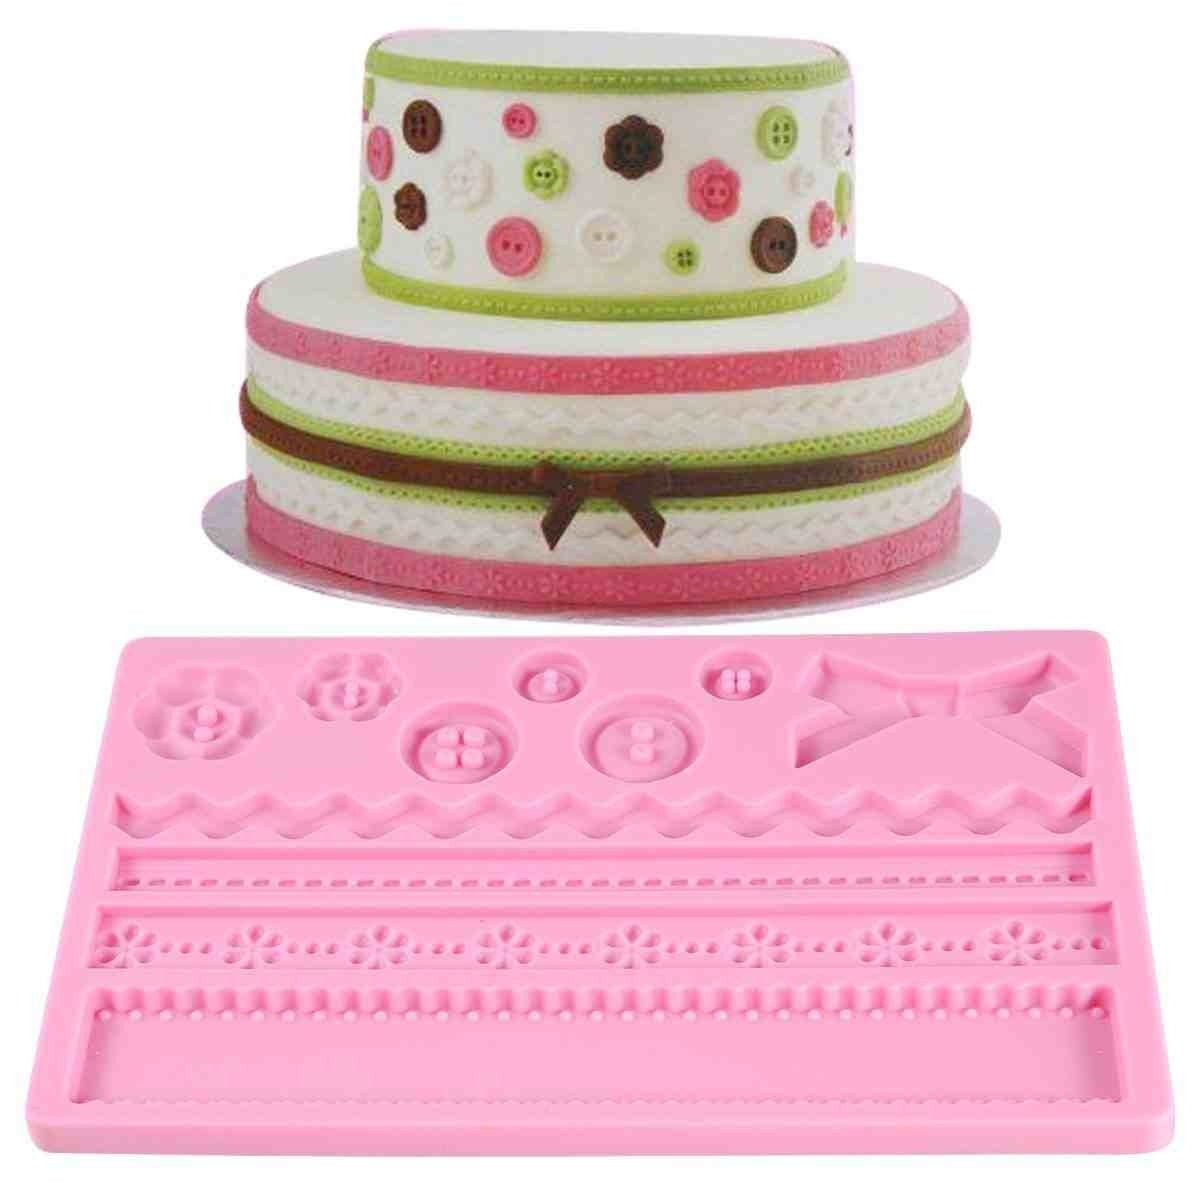 Fondant Molds for Wedding Cakes top 20 Silicone Fondant Mold Wedding Cake Mold with buttons Grinder